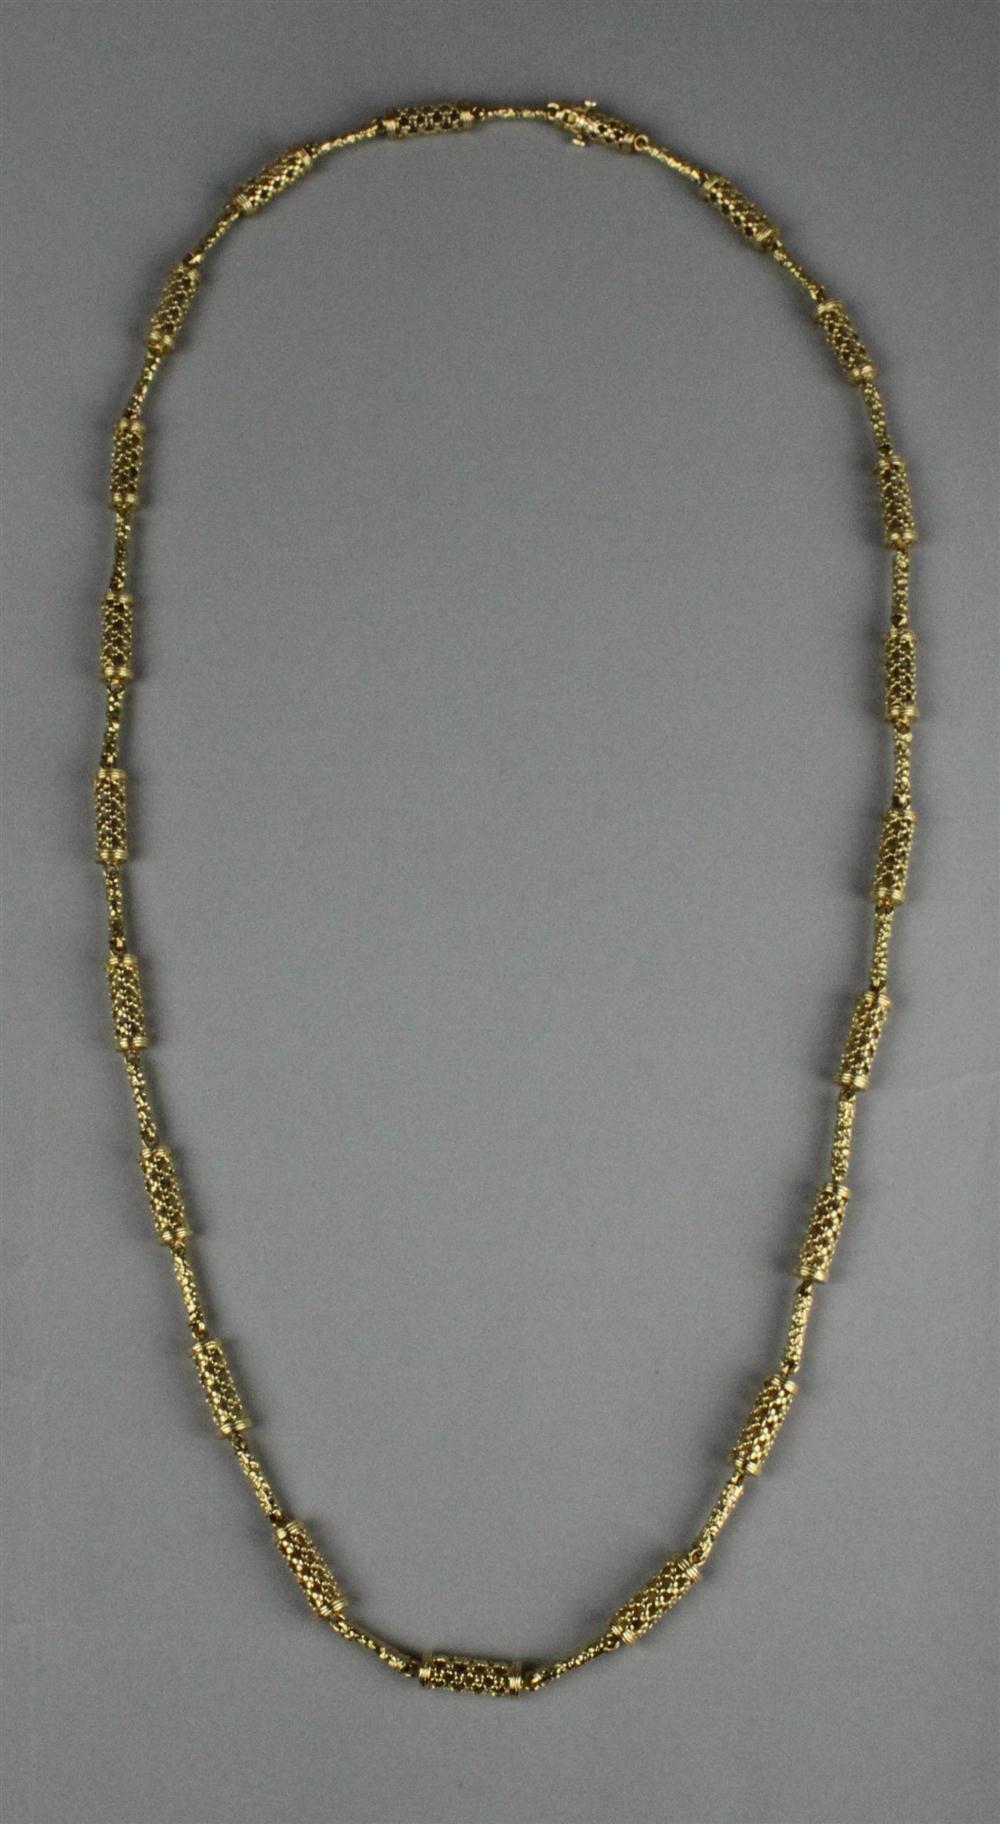 LADY S 18K YELLOW GOLD LINK NECKLACE 145b87